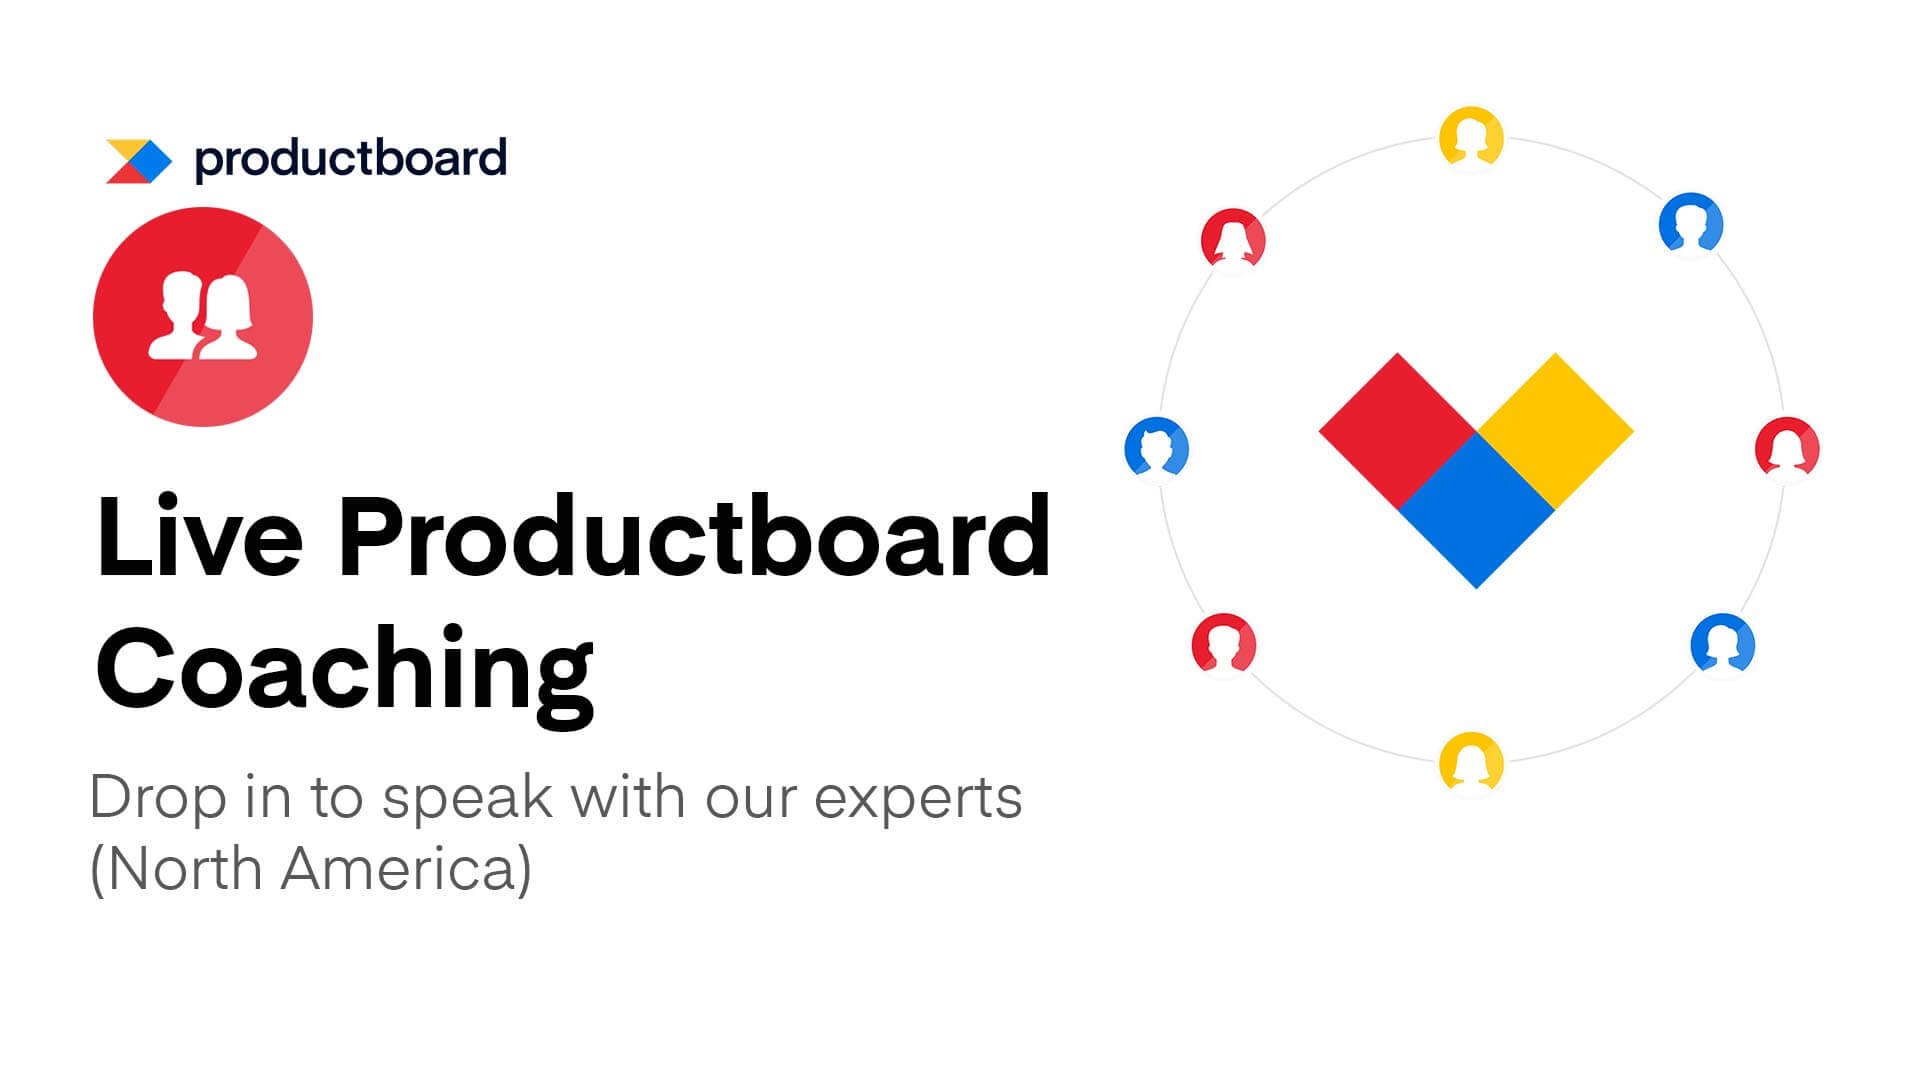 1/27 Live Productboard Coaching (North America)